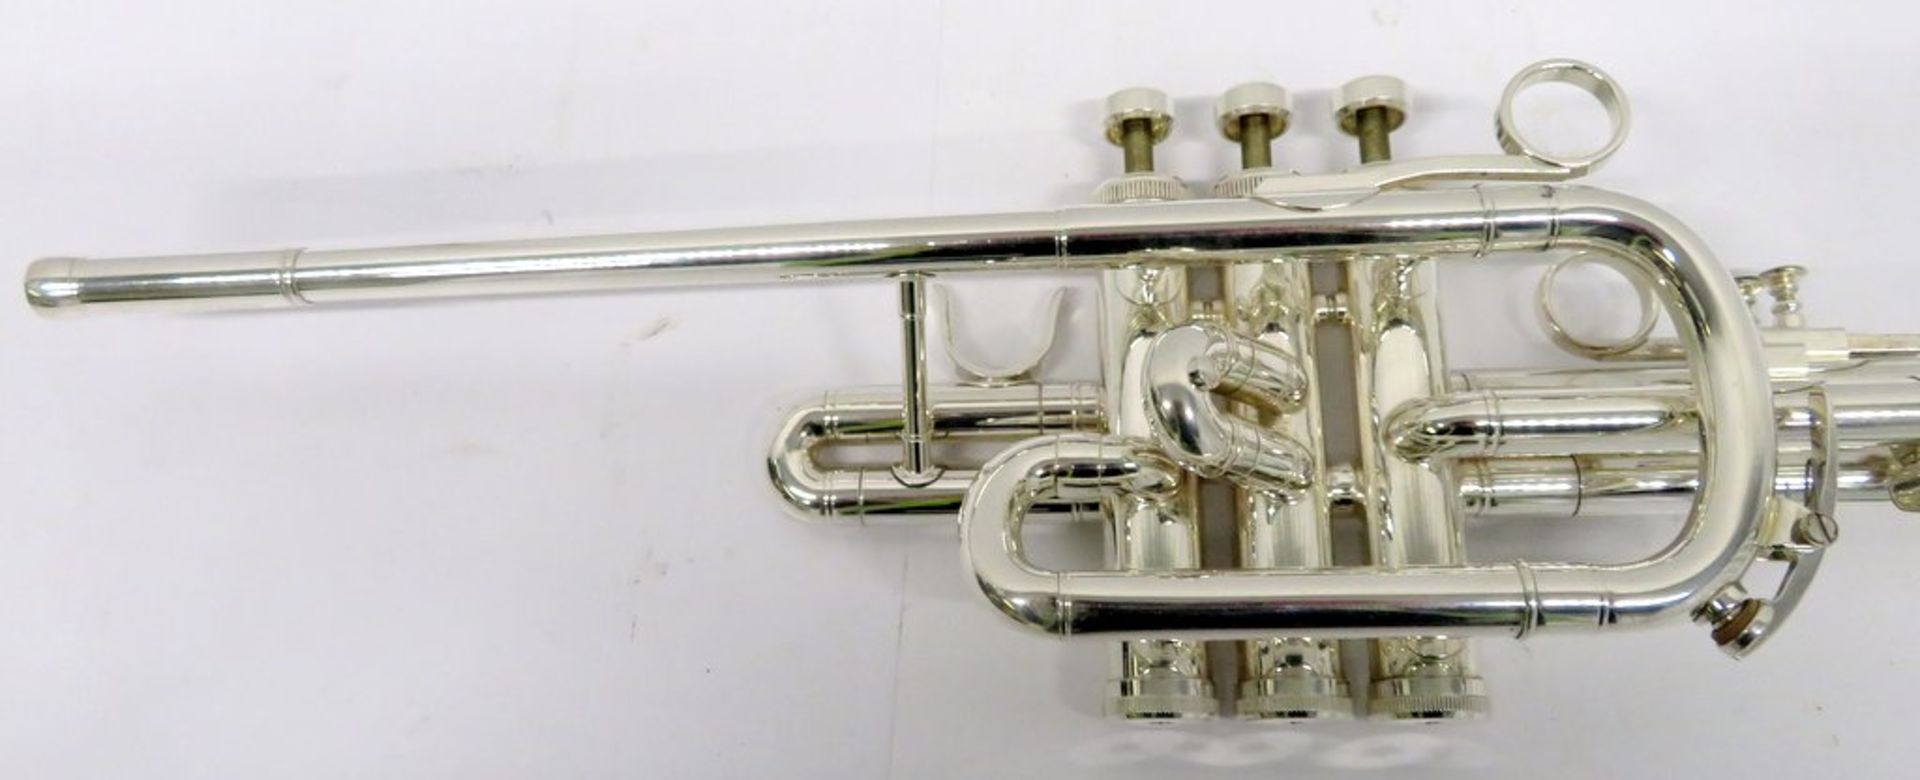 Besson BE706 International Fanfare Trumpet Complete With Case. - Image 10 of 14